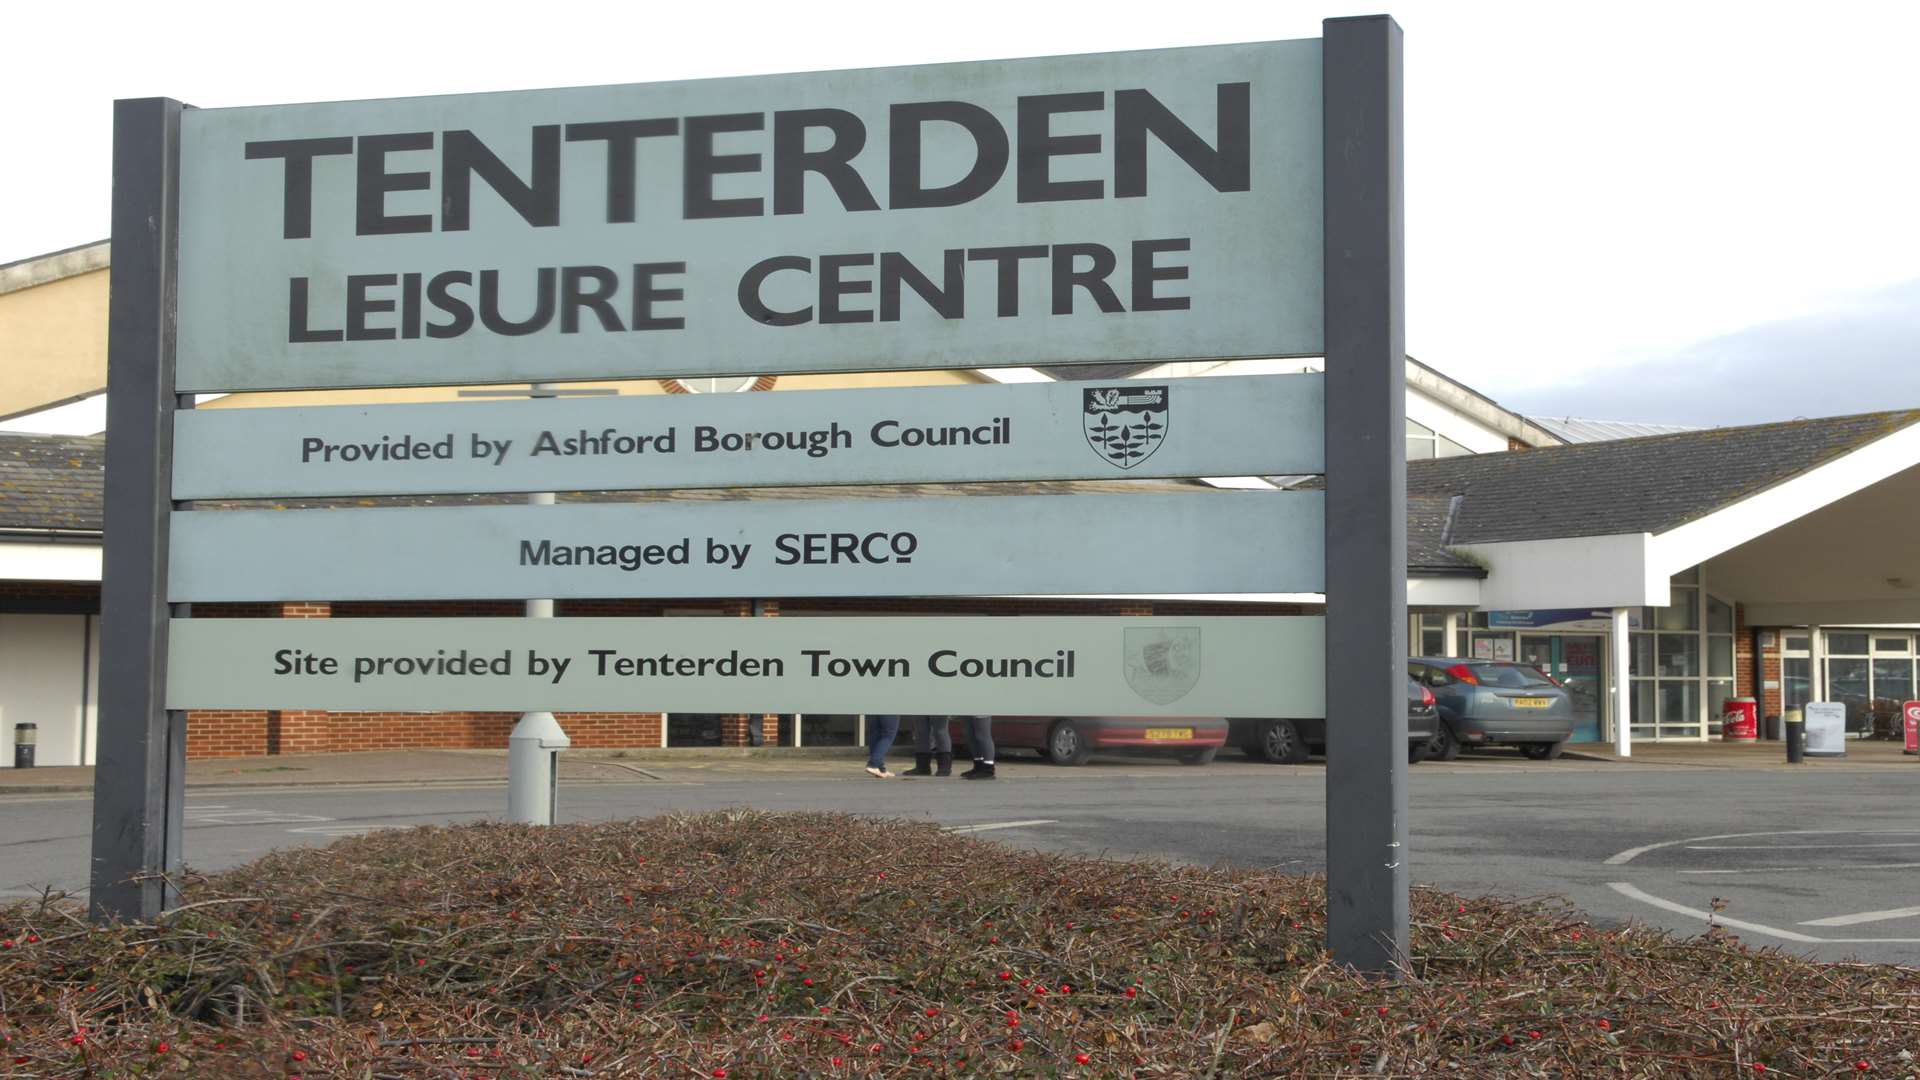 McKenna worked as a pool attendant at Tenterden Leisure Centre